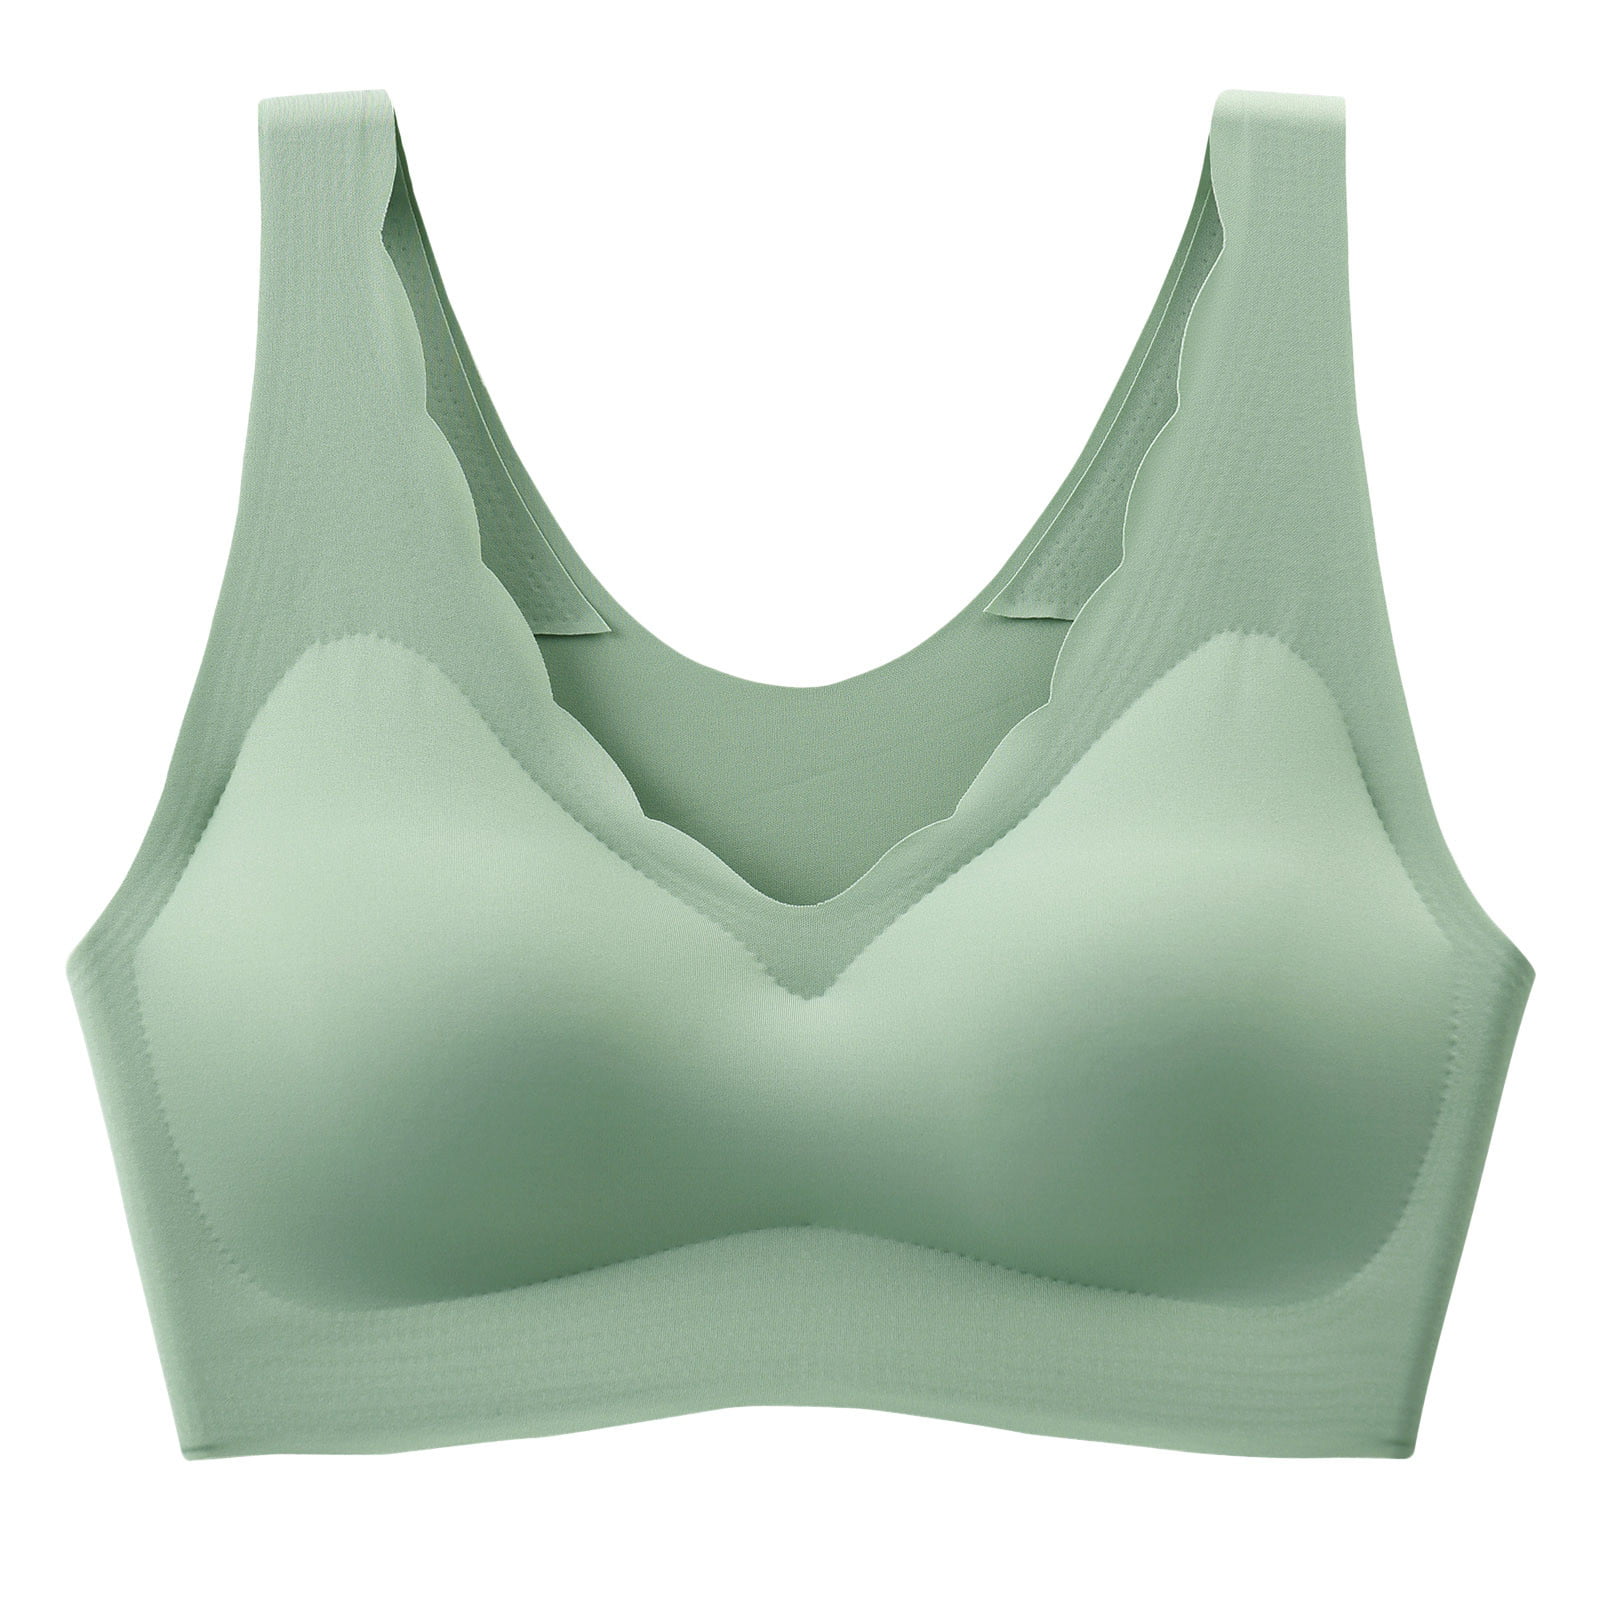 CAICJ98 Lingerie for Women High Neck Supportive Sports Bra High Impact - No  Bounce Soft Moisture Wicking for Running Racerback Plus Size Green,M